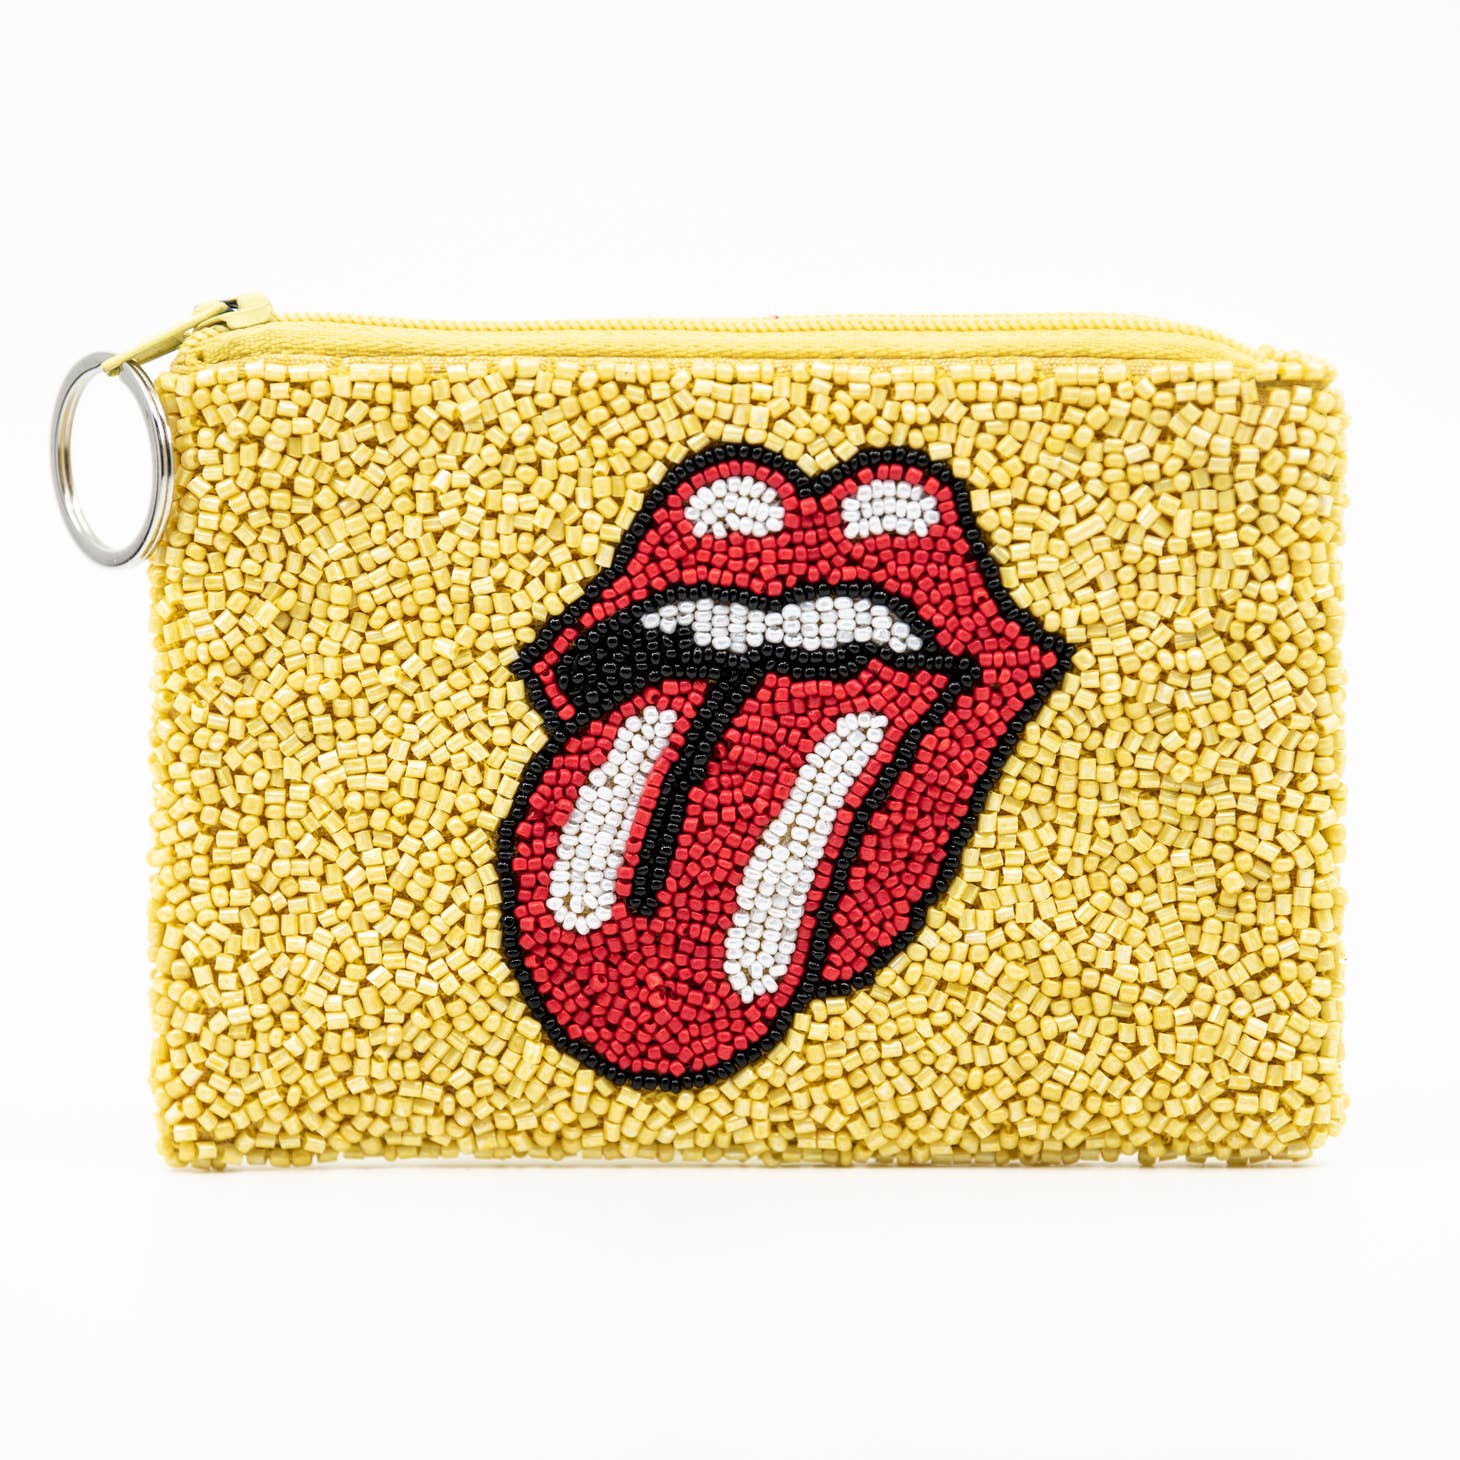 ROLLING STONE COIN PURSE - YELLOW AND RED